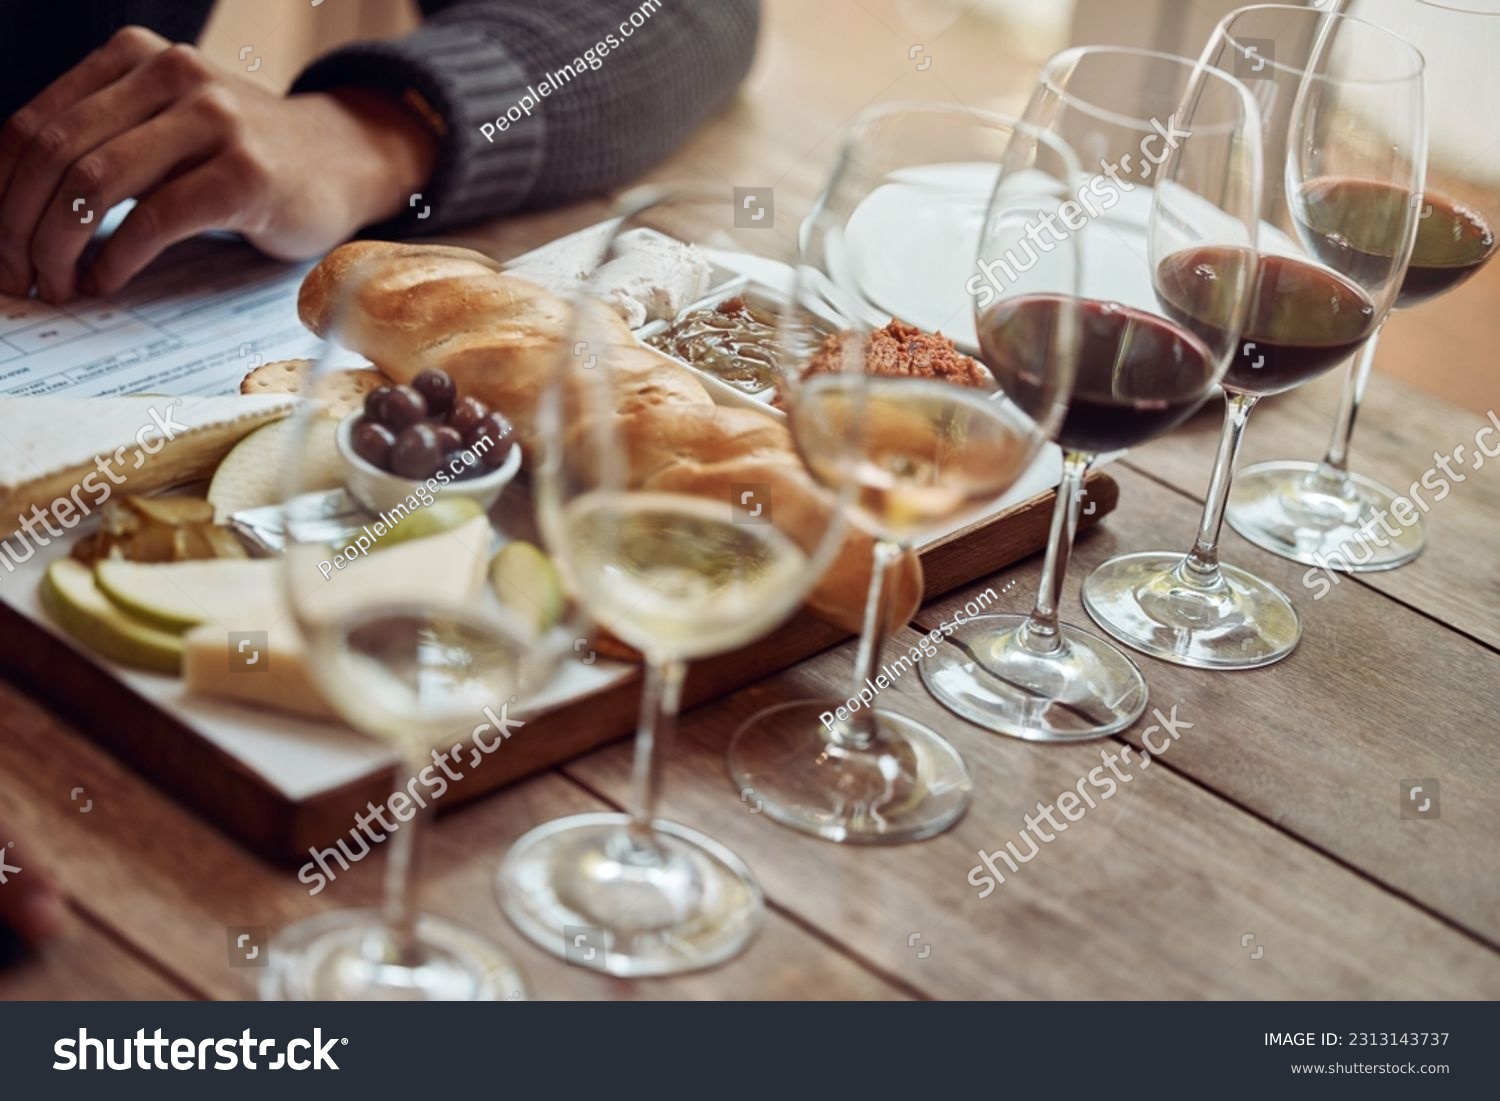 Wine tasting, cheese board and winery restaurant with alcohol and glass for customer. Eating, drink and person with rich wines and food pairing in a fine dining and luxury snack experience alone #2313143737